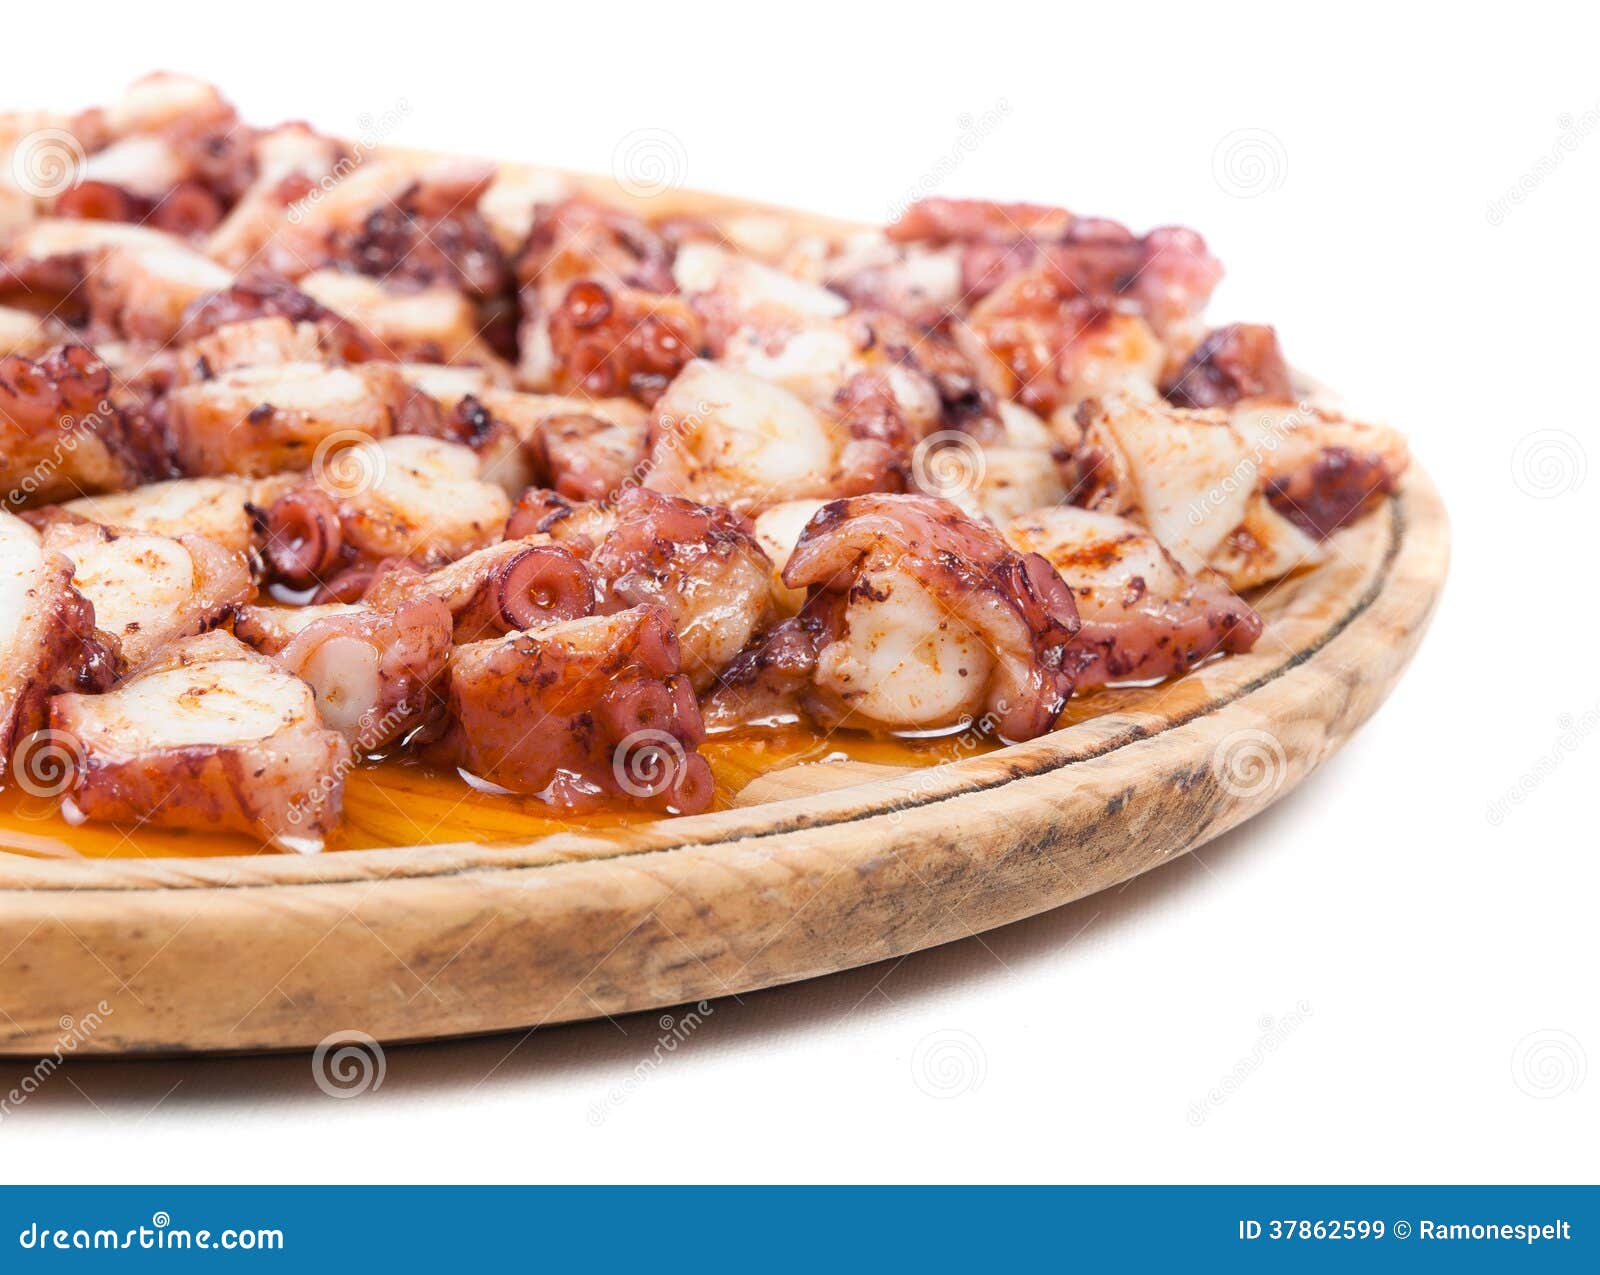 pulpo a feira in a wooden plate